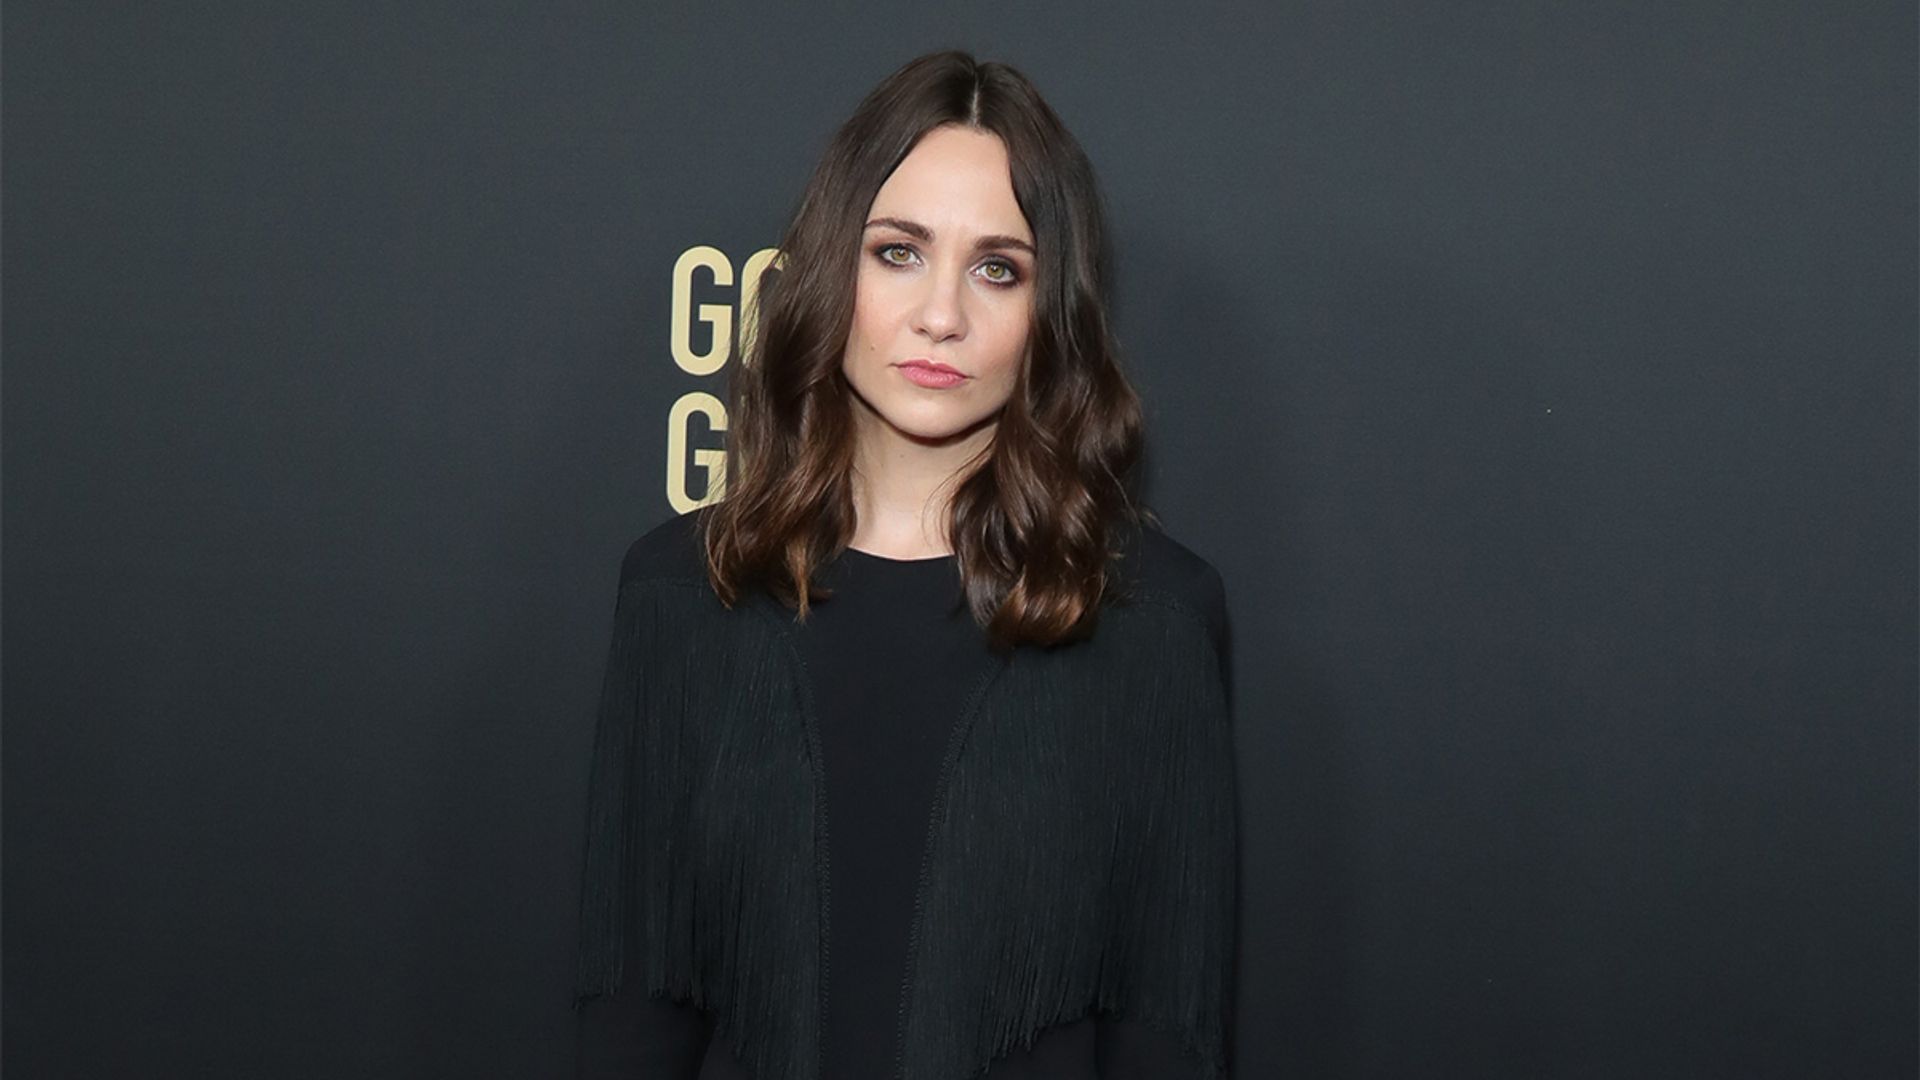 Tuppence Middleton bravely opens up about her struggle with OCD ahead of International Women's Day